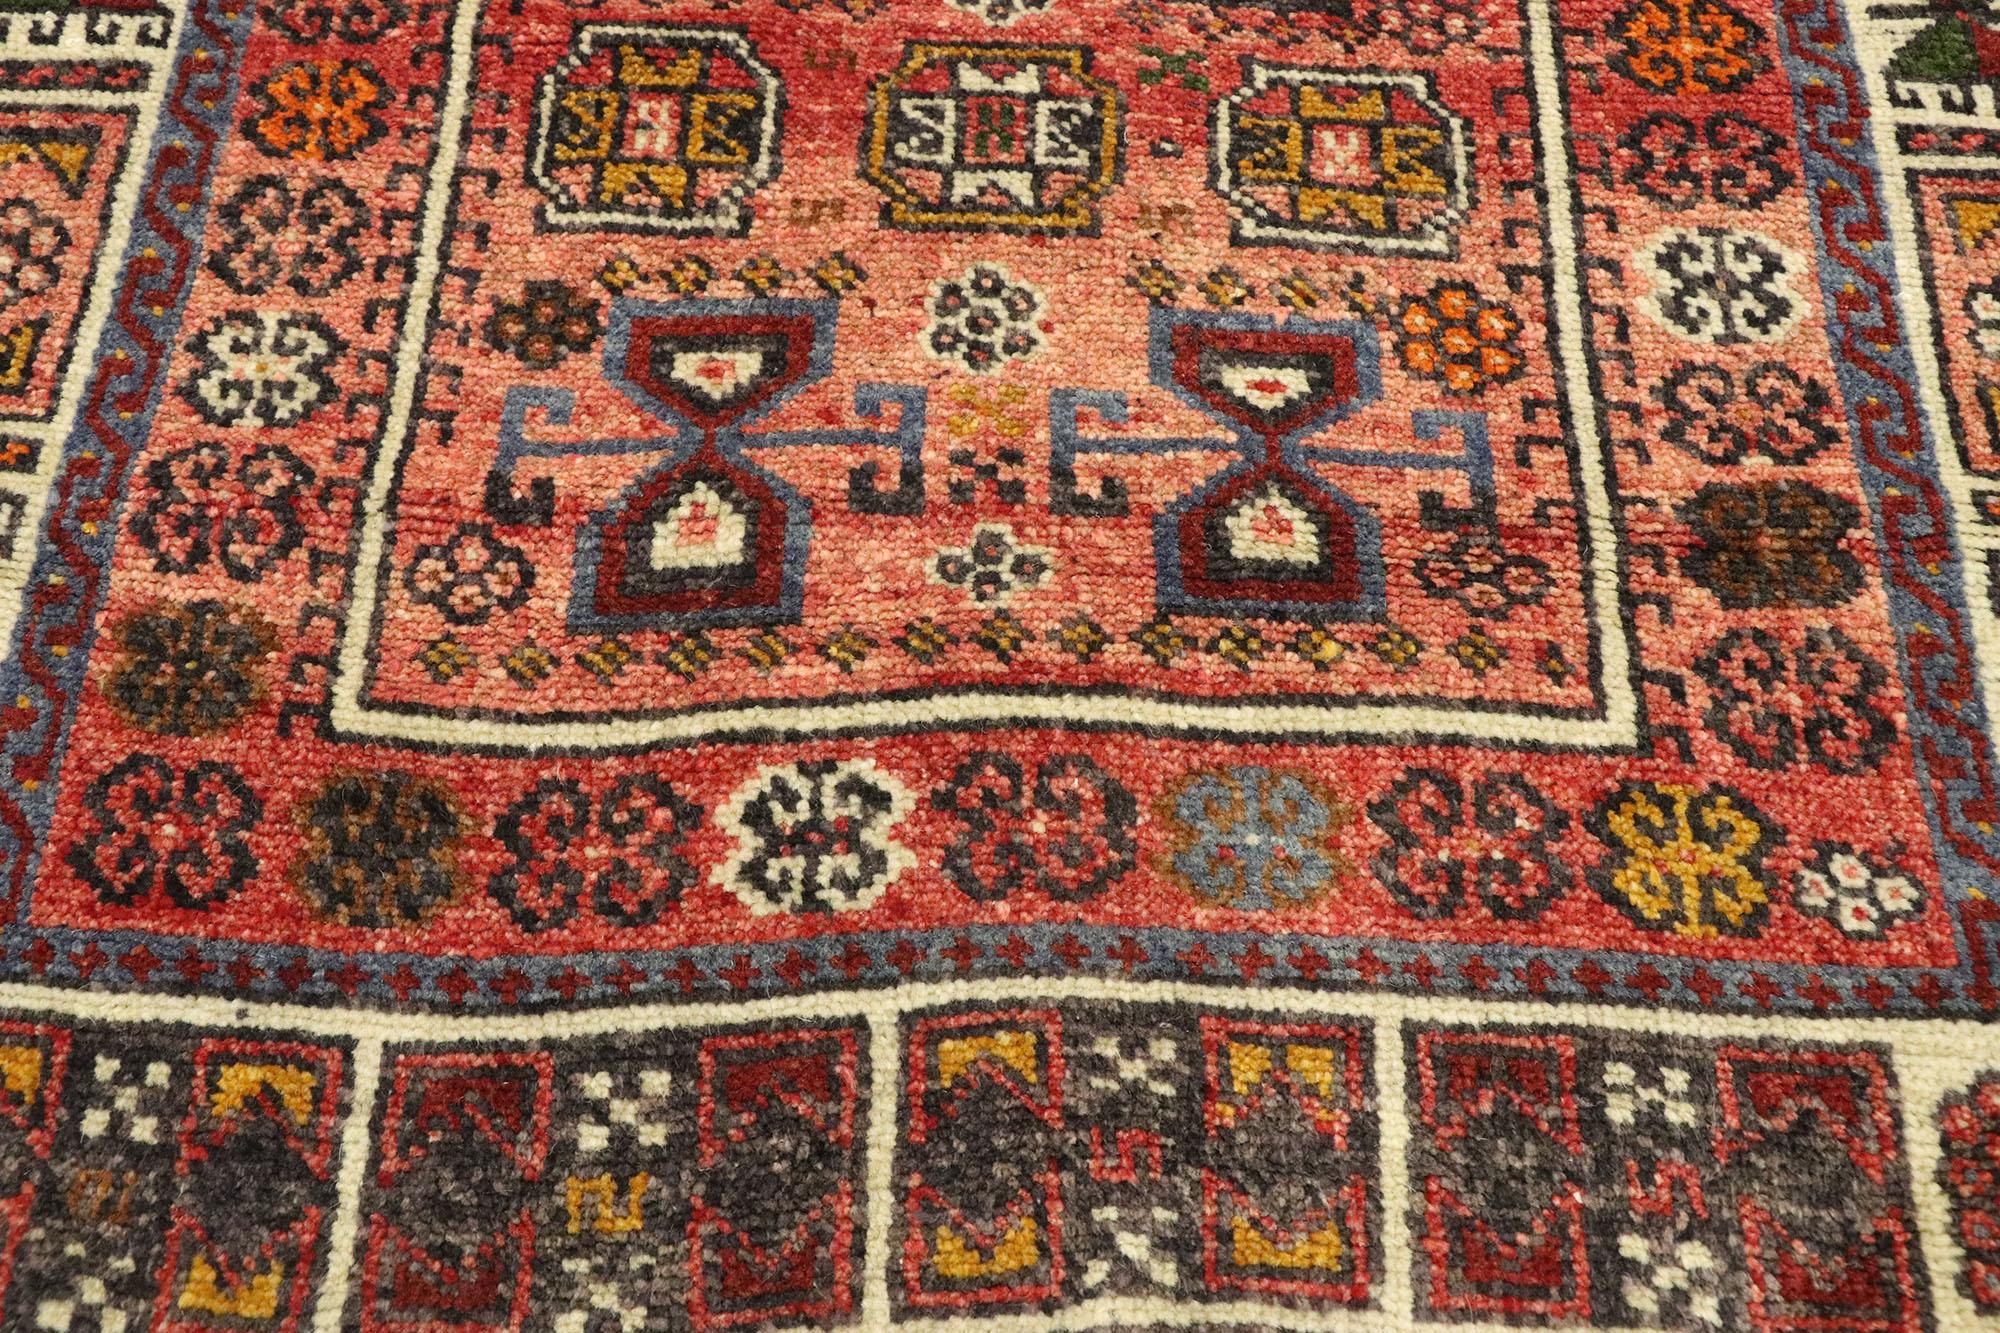 Vintage Turkish Oushak Prayer Rug with Tribal Folk Art Charm In Good Condition For Sale In Dallas, TX